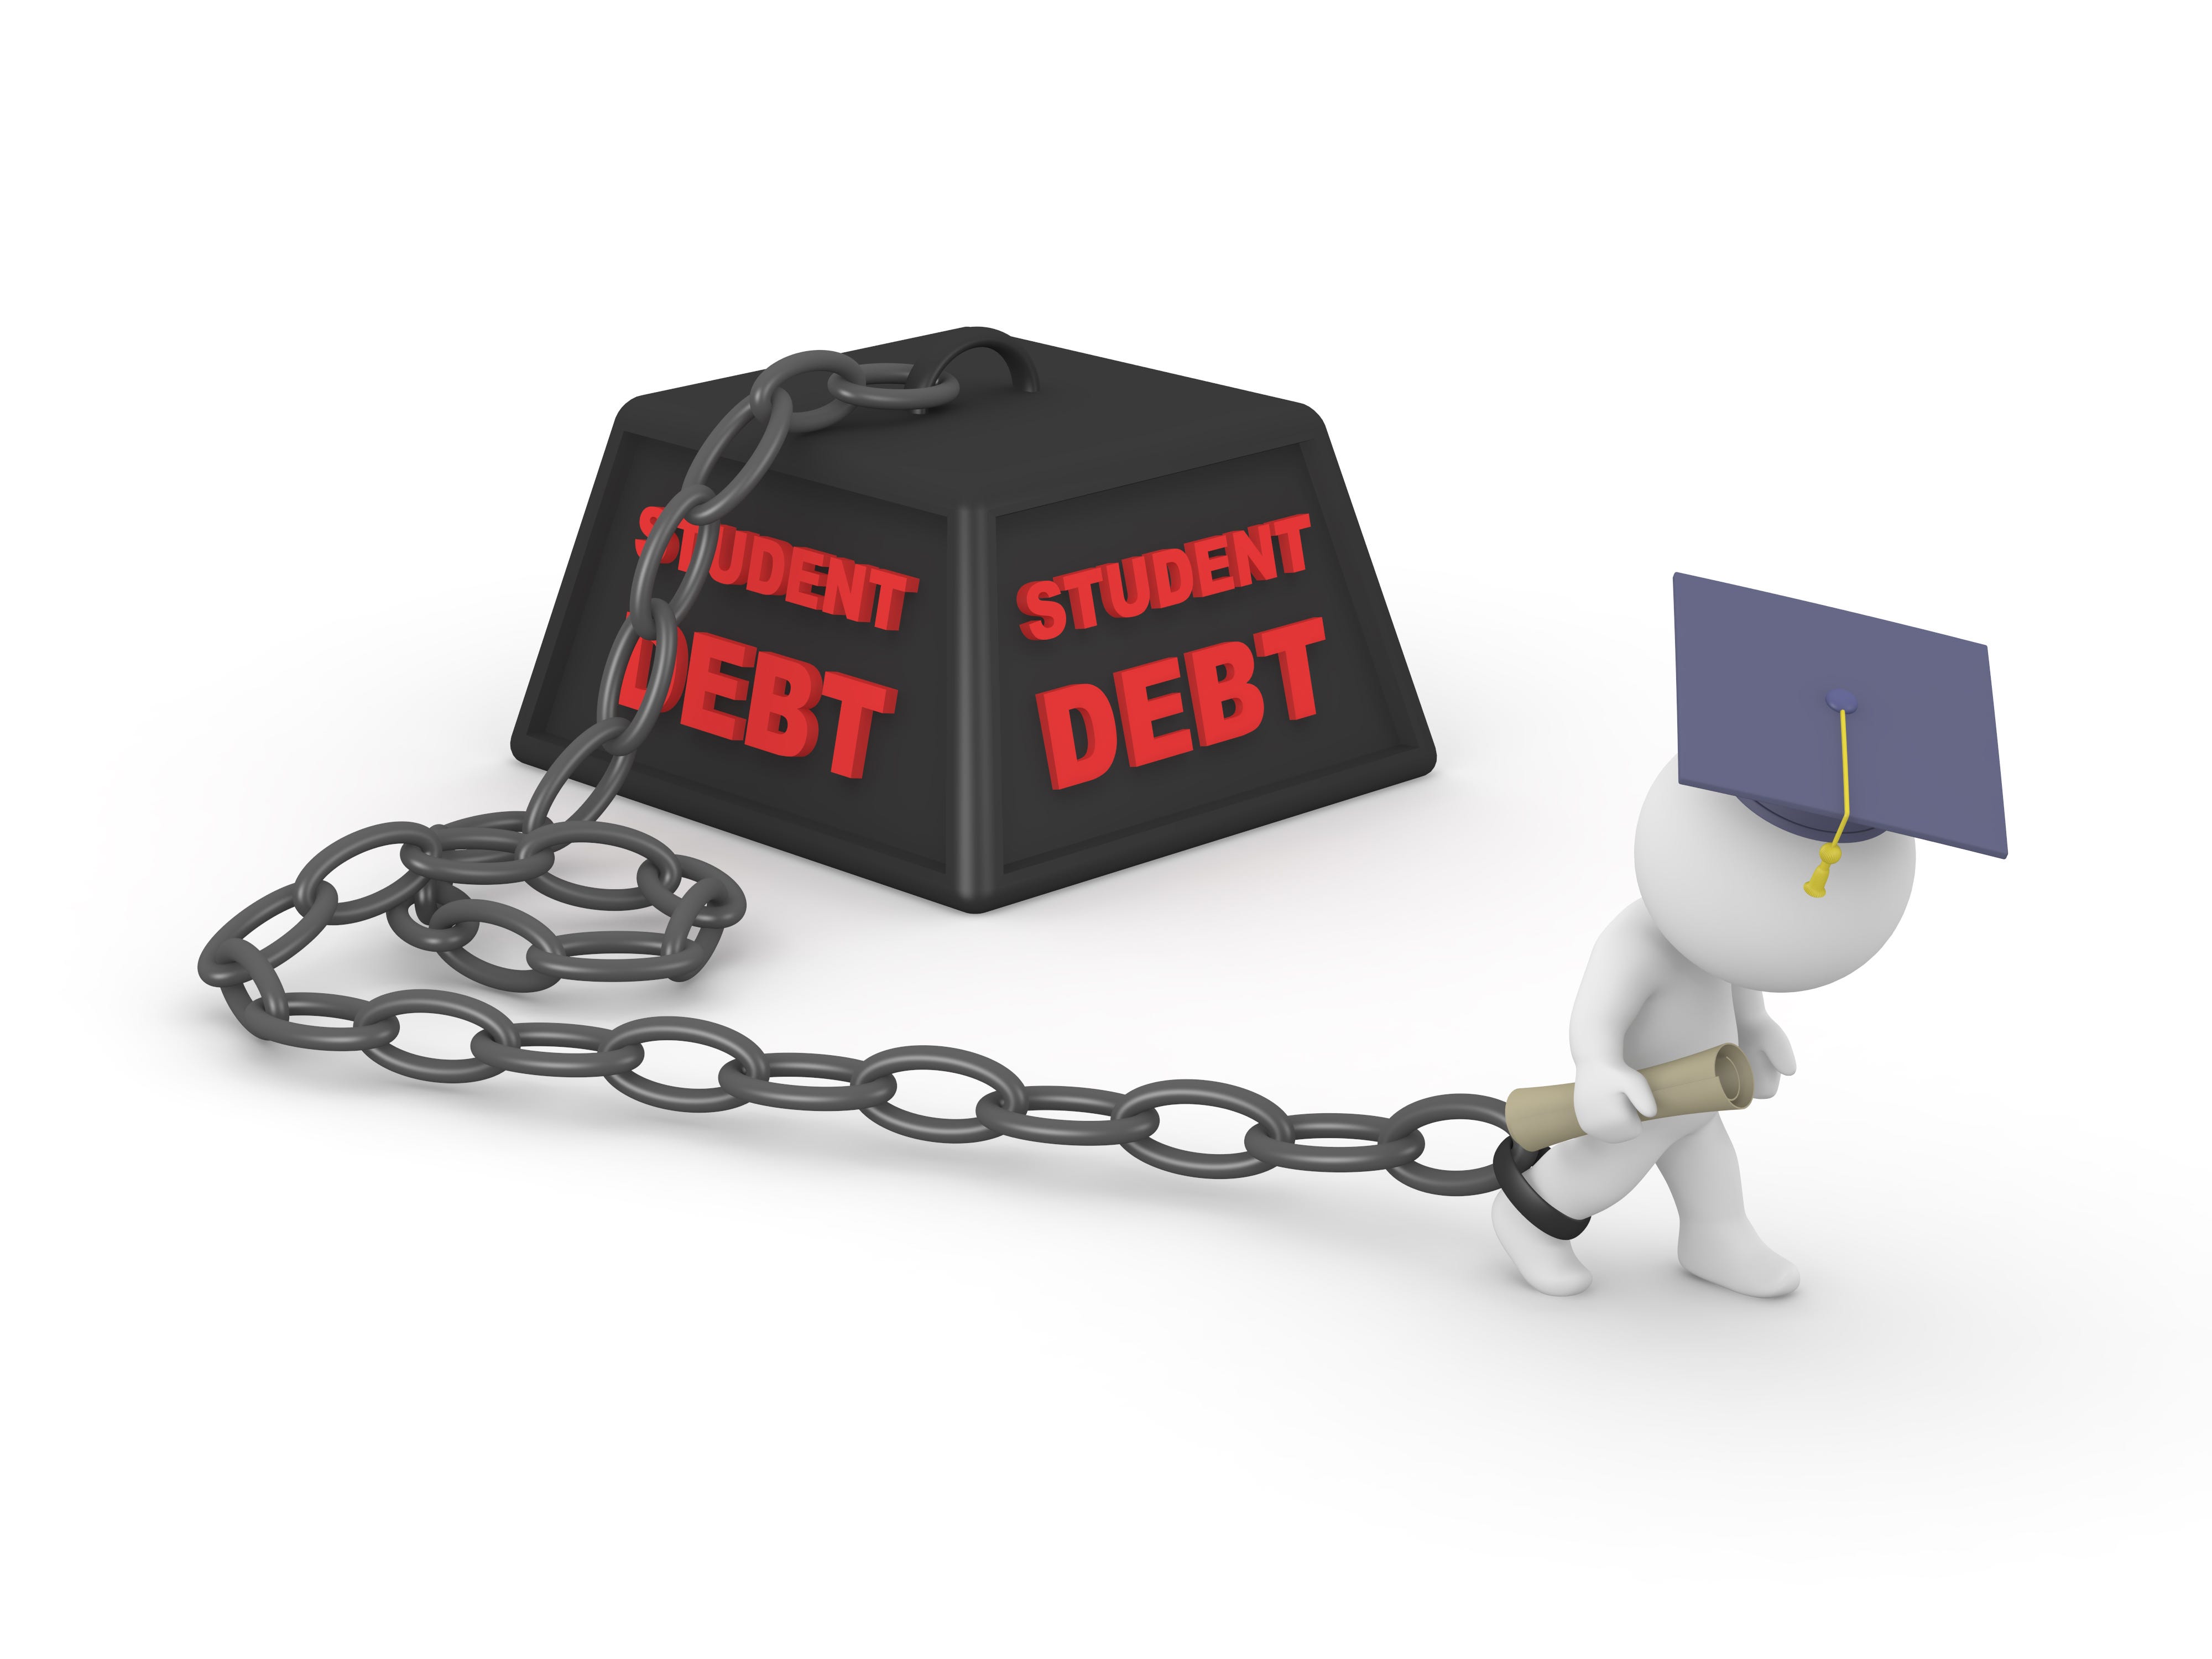 College students, beware: Scammers prey on those in debt